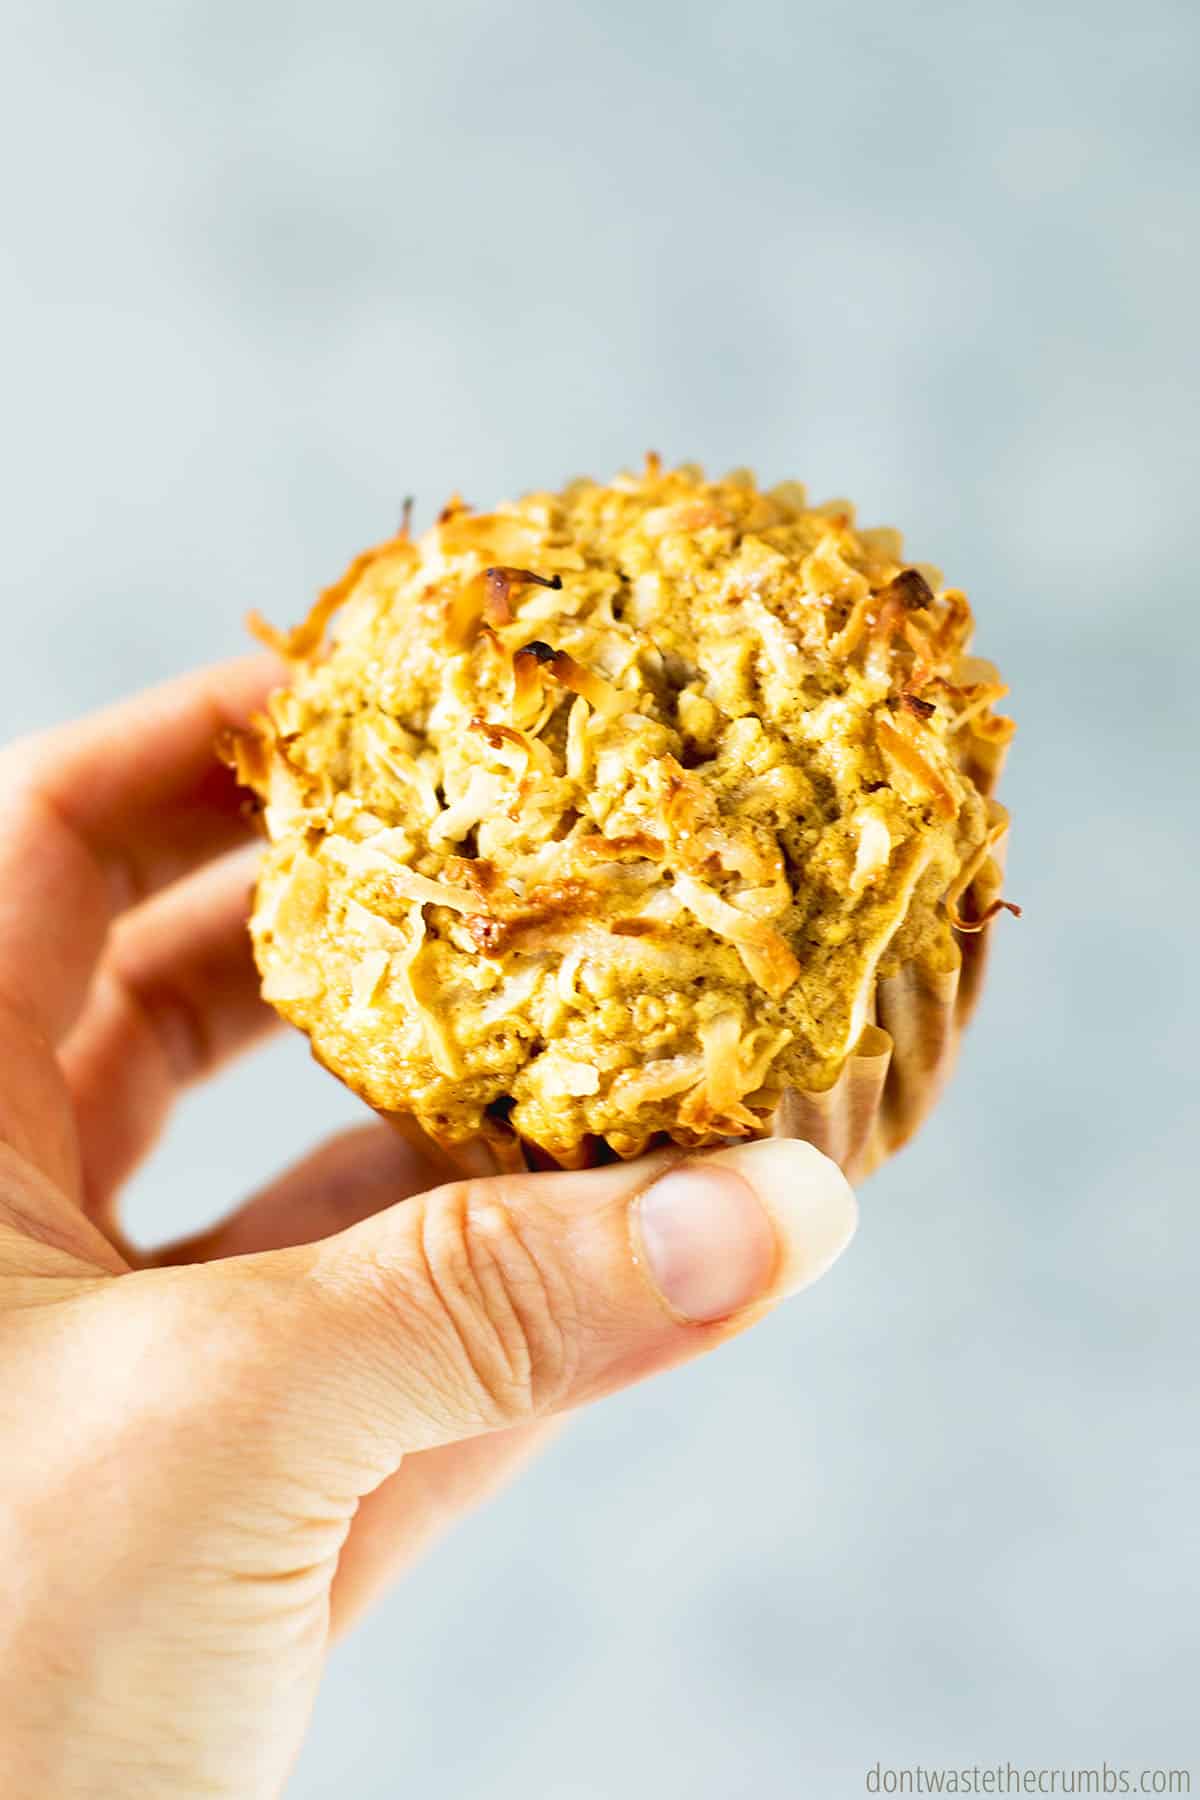 Hand holding buttermilk oatmeal muffins baked with shredded coconut